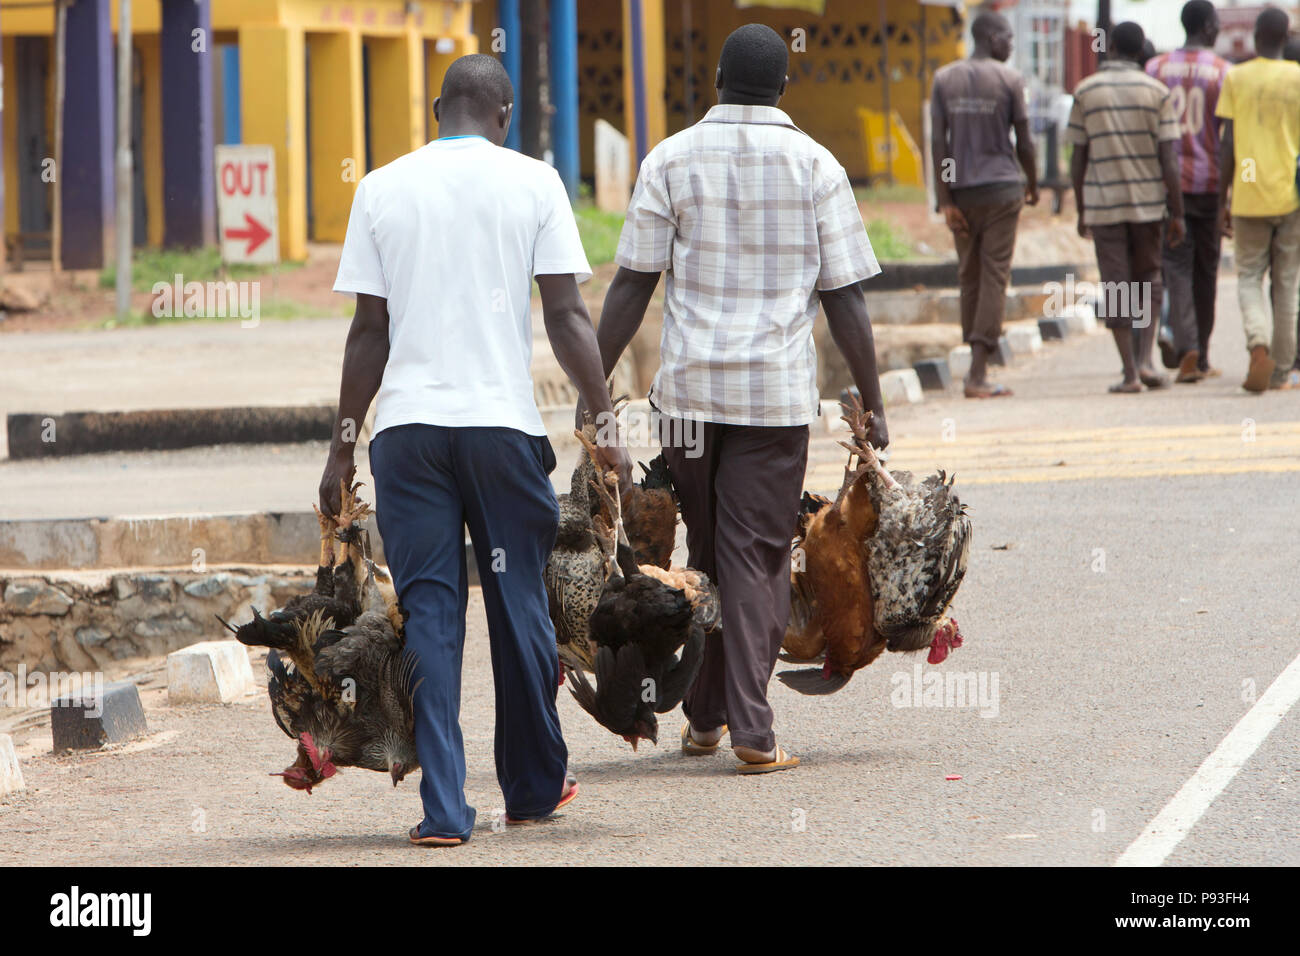 Kamdini, Uganda - city view. Flying dealers carry chickens on the street. Stock Photo